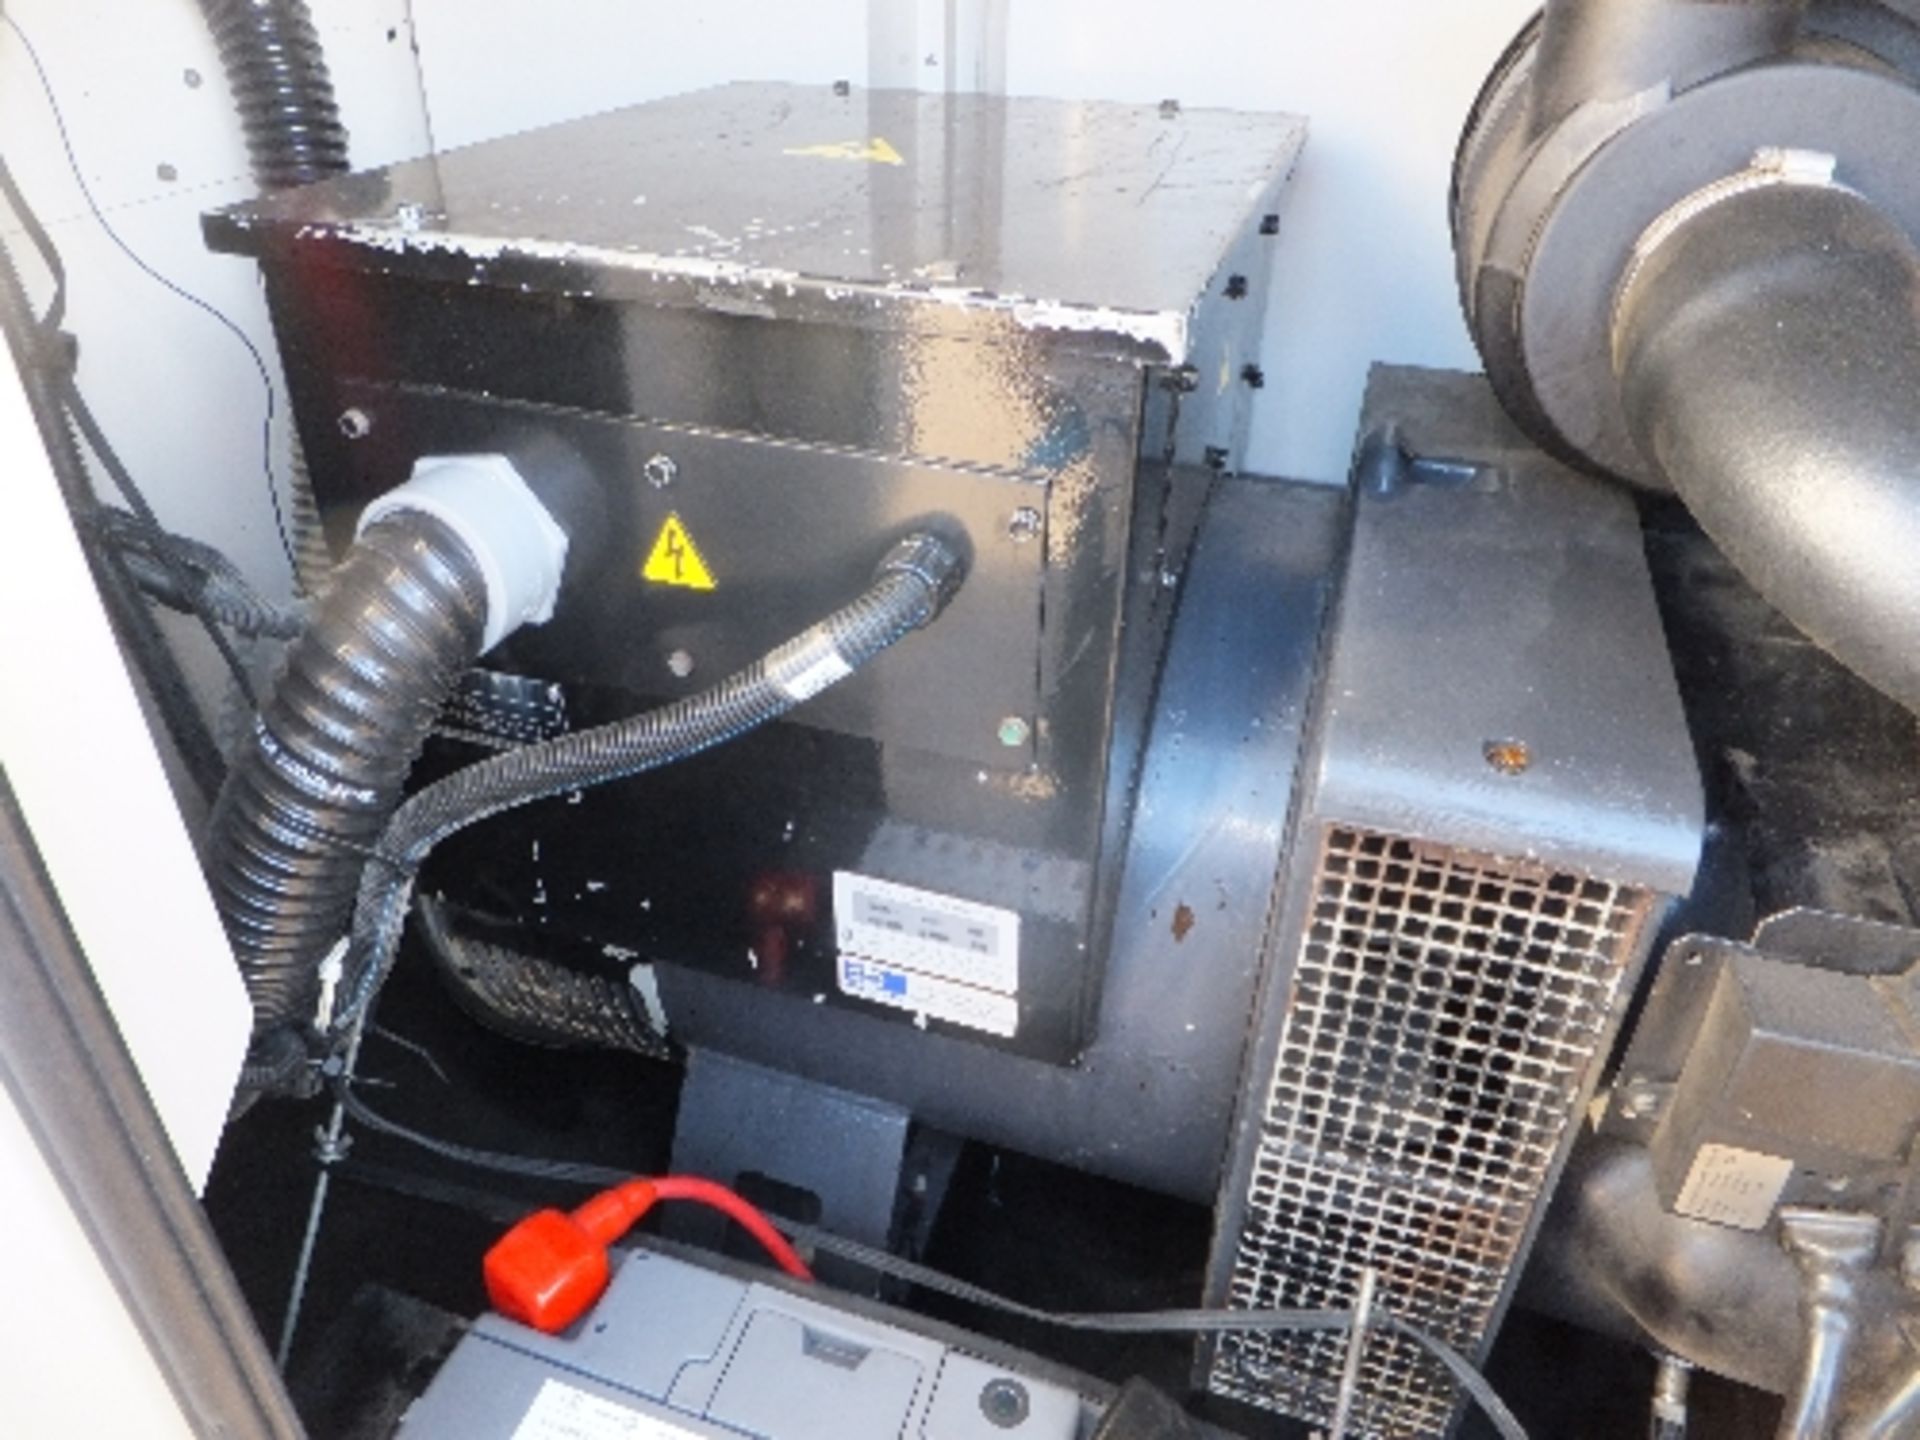 Wilson Perkins 100kva generator 23,106 hrs - runs, no power this lot is sold on instruction of - Image 3 of 7